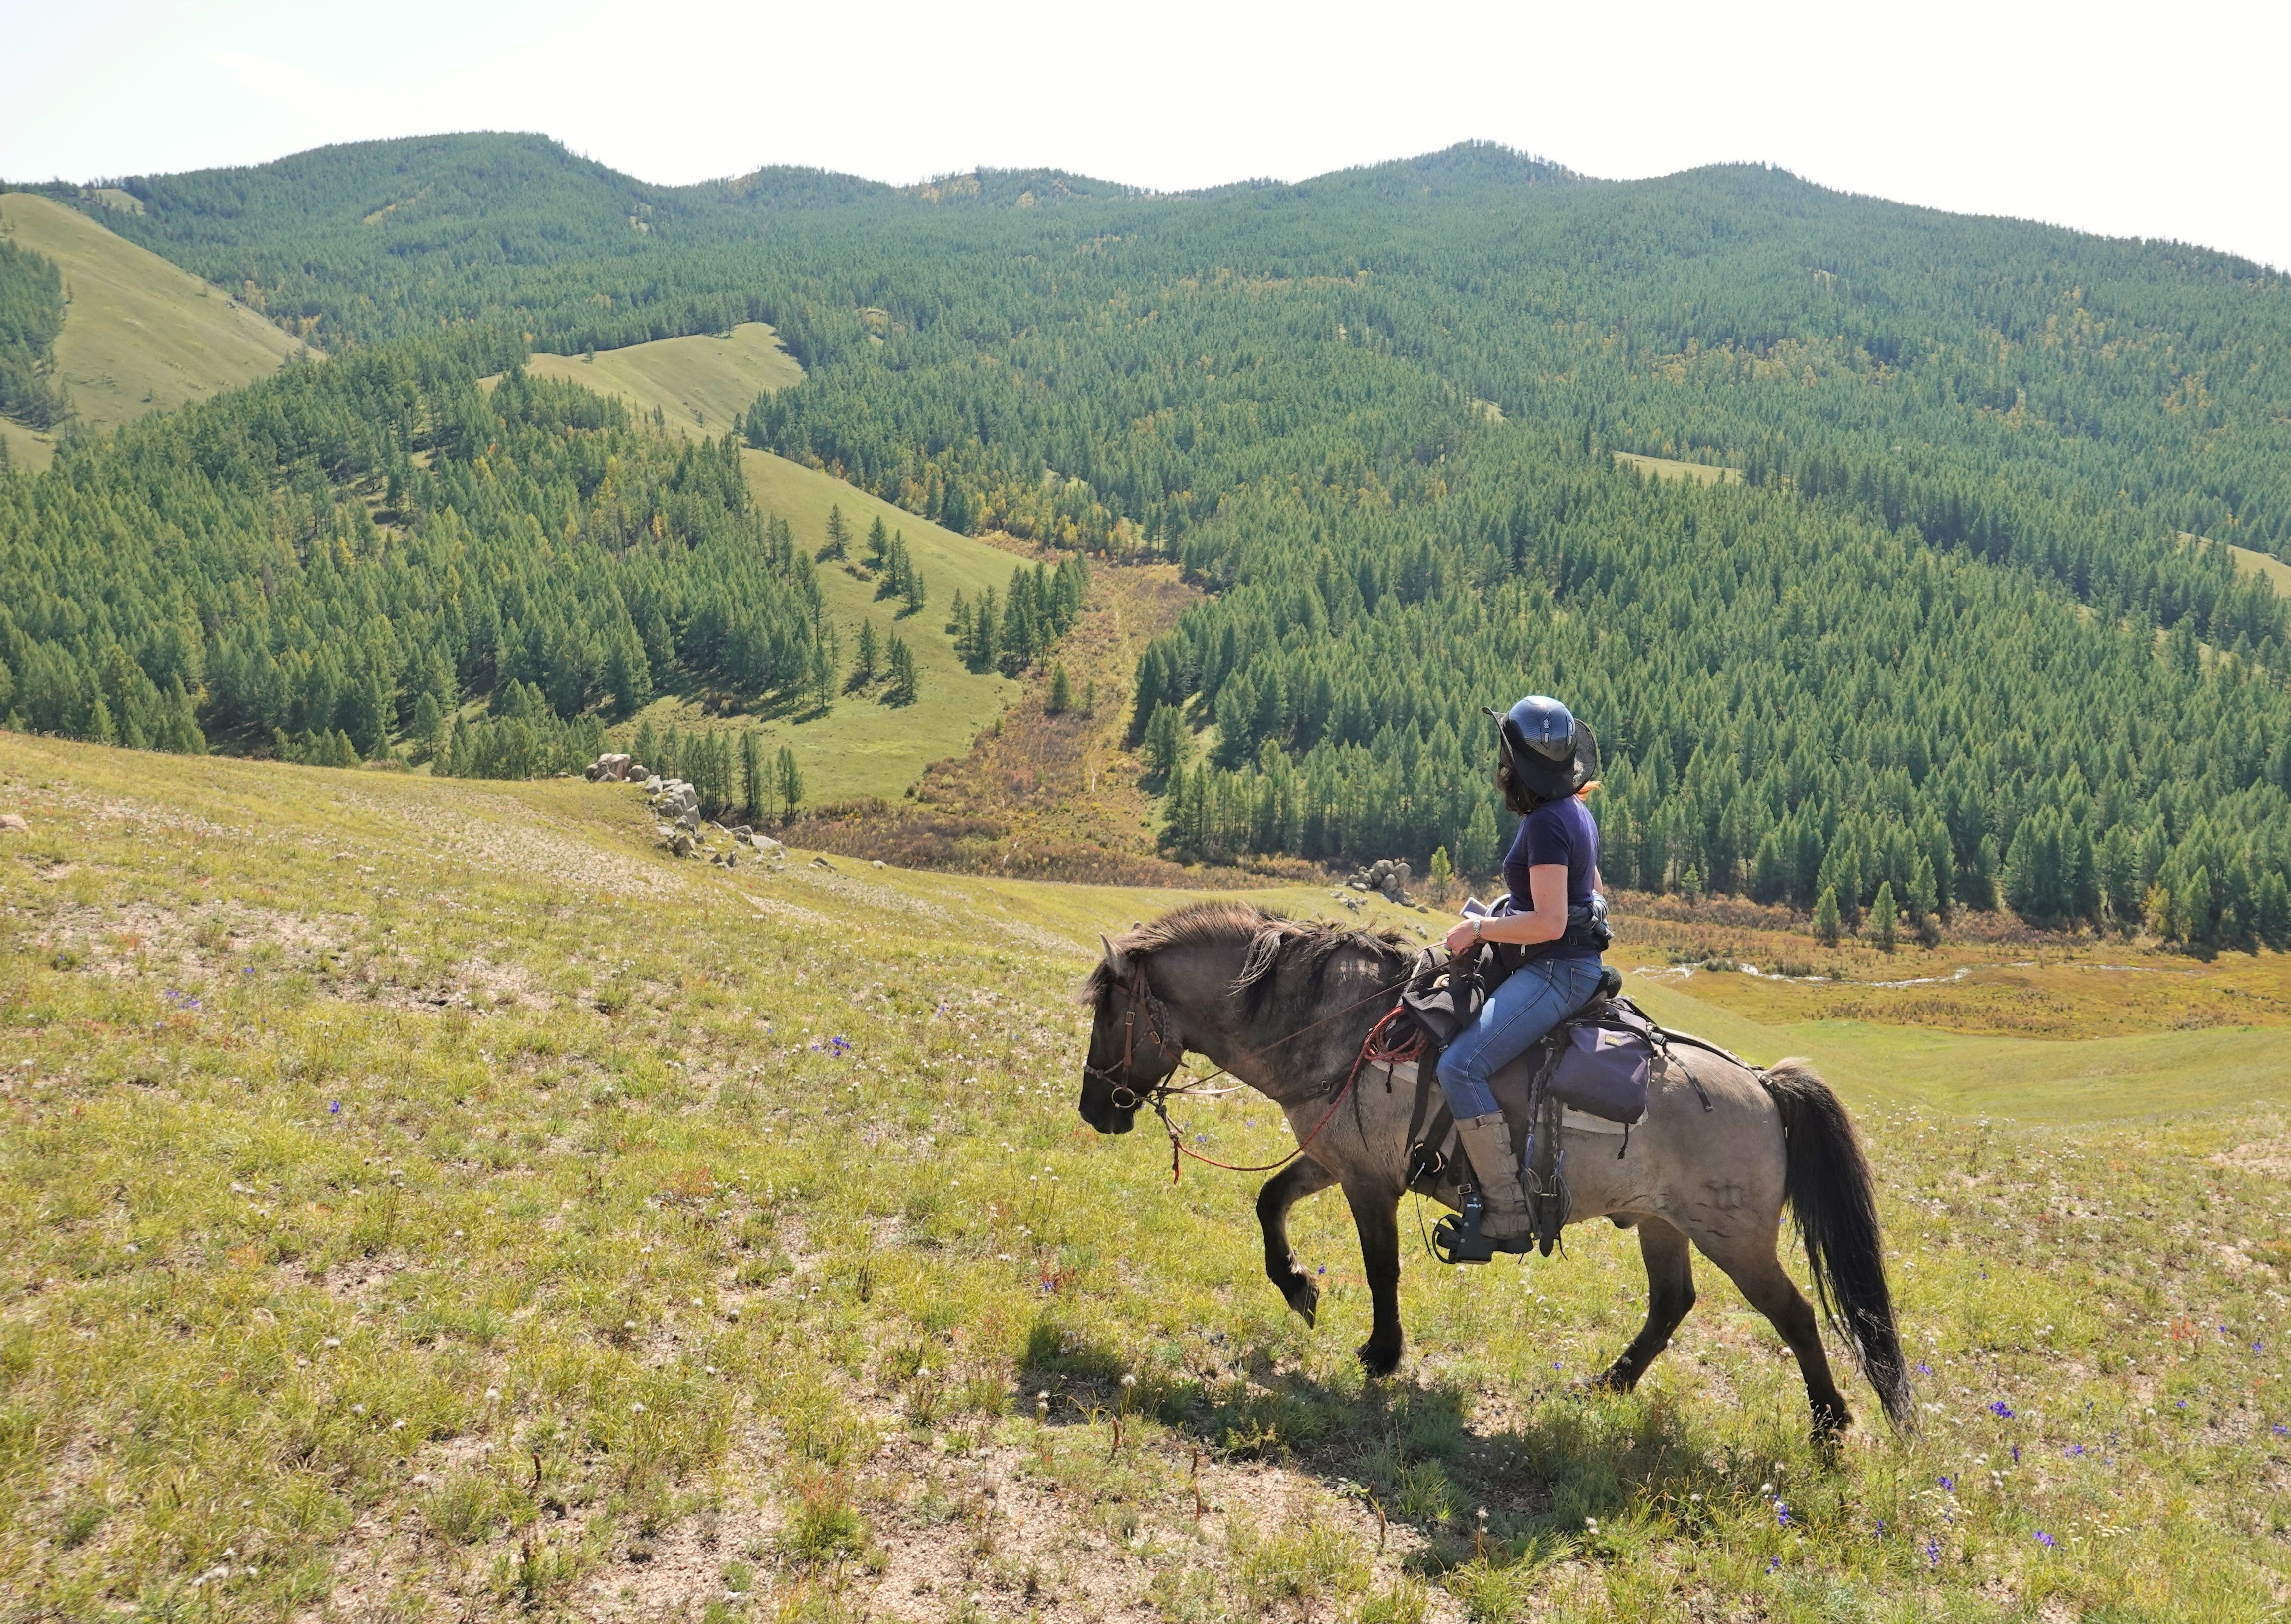 Horses, the Dawn of Arts and Forgotten Dreams, Horseback Journeys in Mongolia, Riding Horses in Mongolia